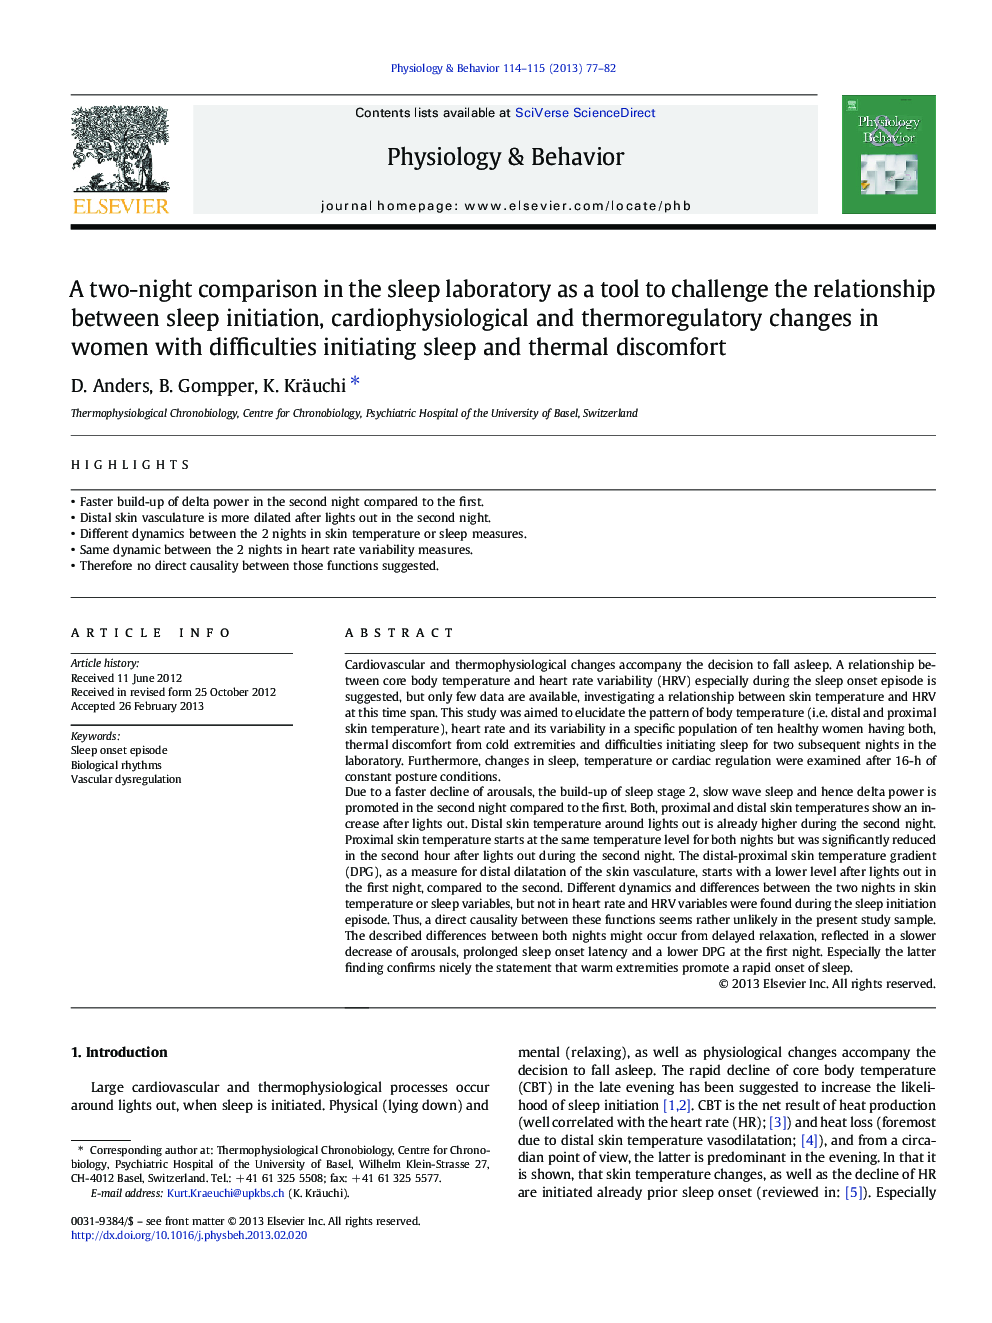 A two-night comparison in the sleep laboratory as a tool to challenge the relationship between sleep initiation, cardiophysiological and thermoregulatory changes in women with difficulties initiating sleep and thermal discomfort